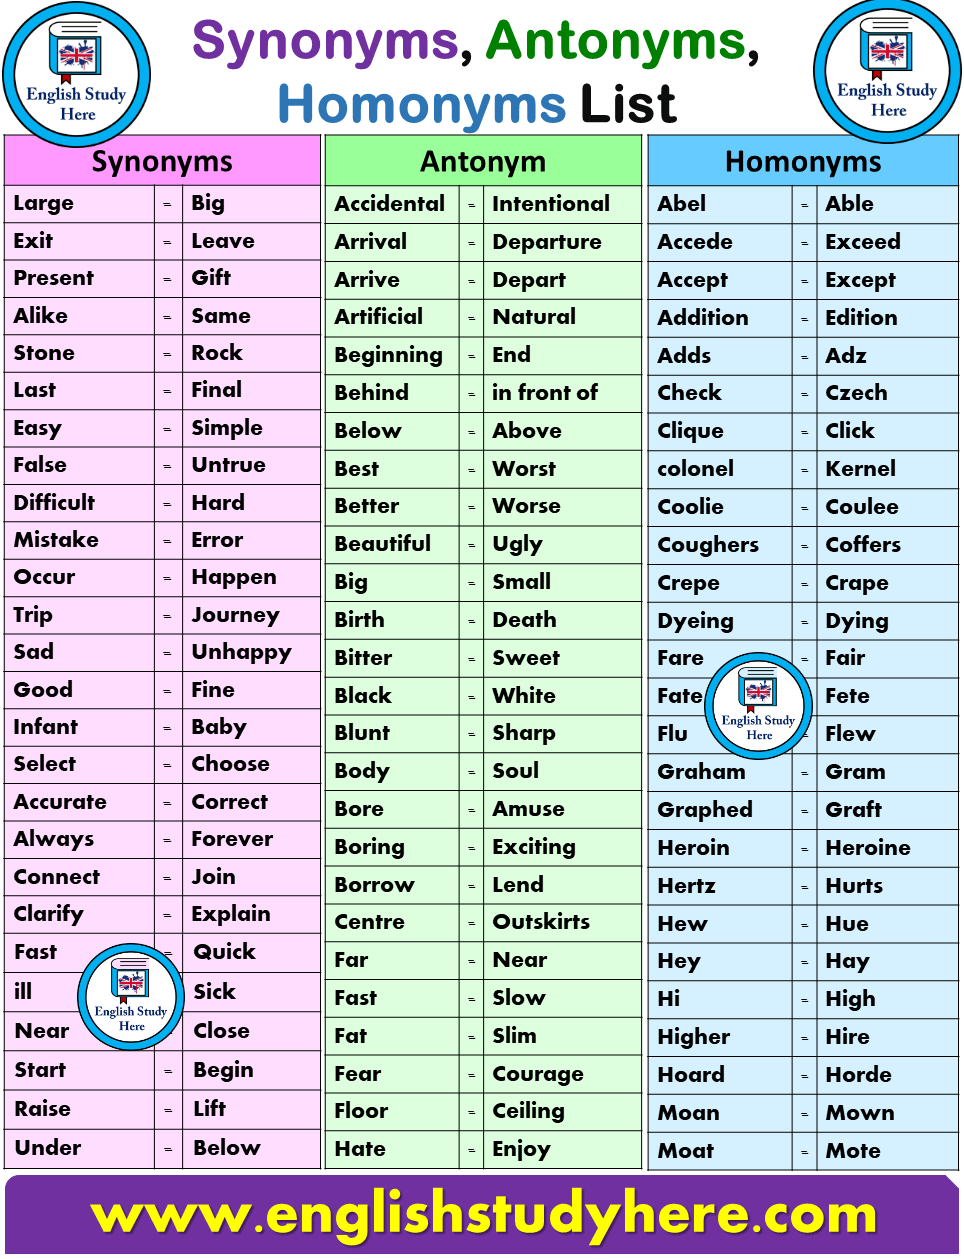 Synonyms Antonyms And Homonyms List English Study Here